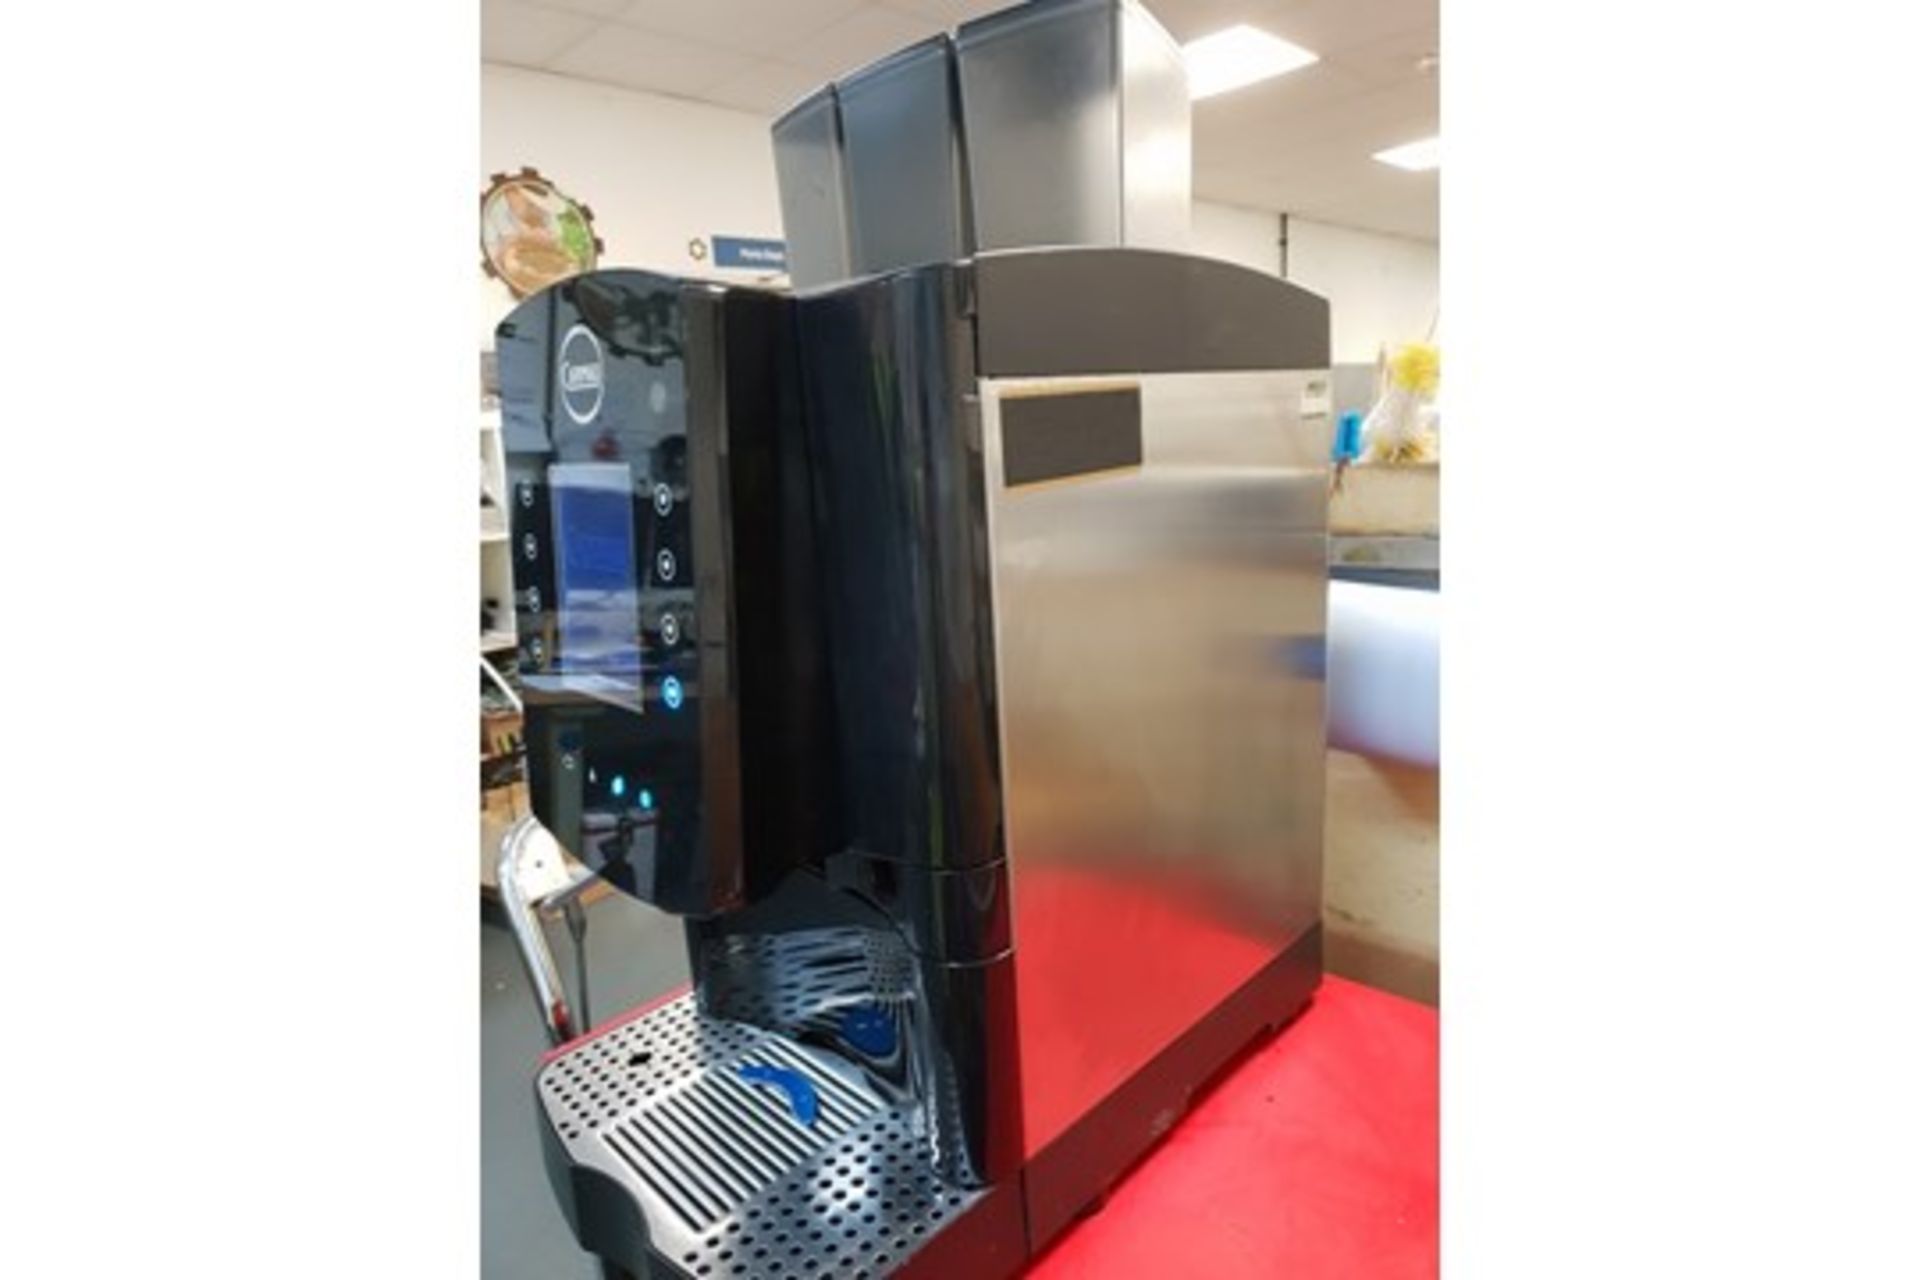 Carimali Solar Touch Drinks Machine – Bean to cup Coffee + Chocolate & Other DrinksThe Carimali - Image 2 of 7